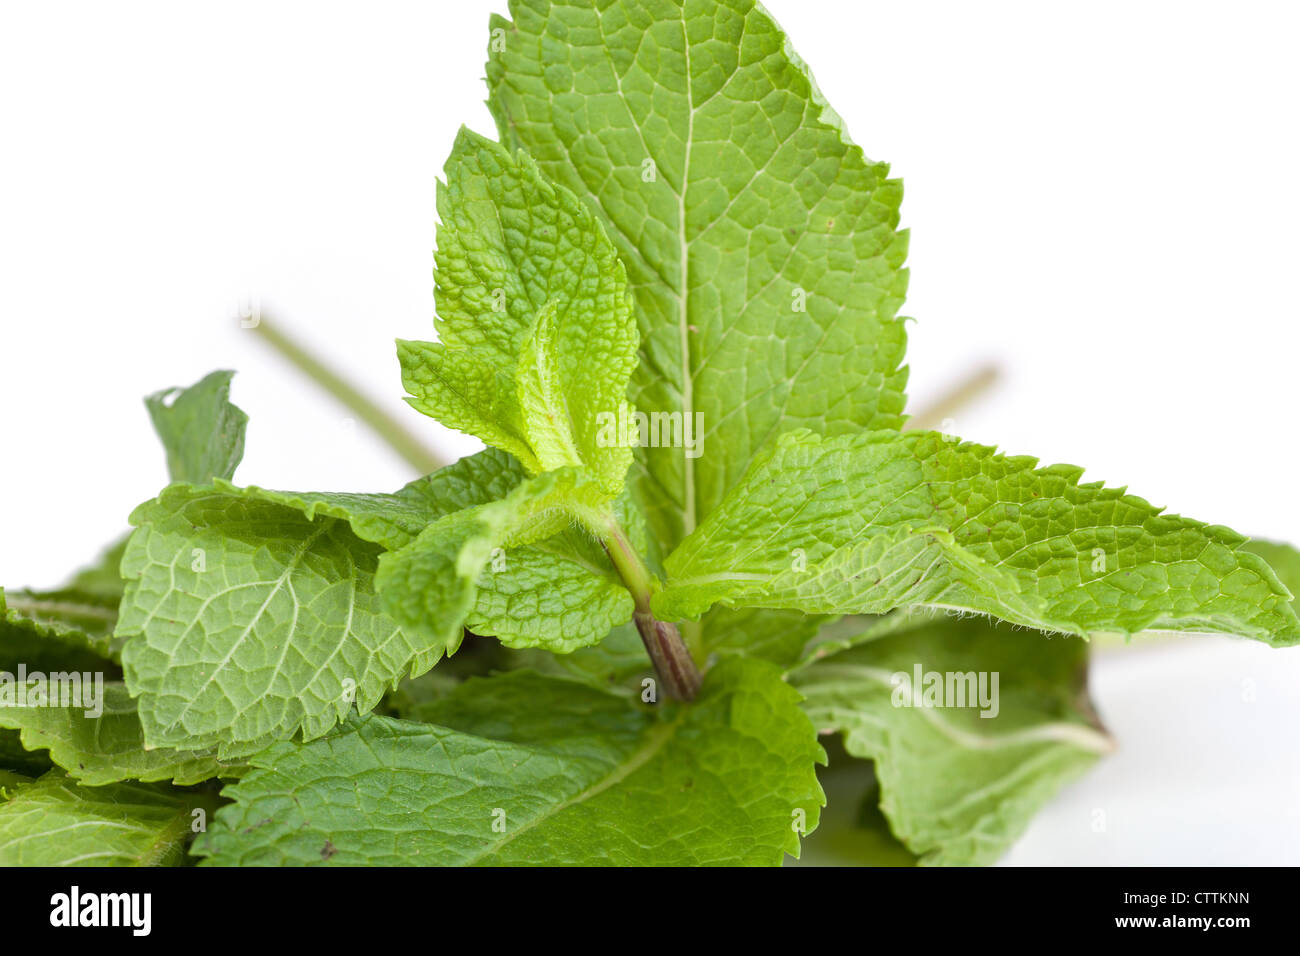 Leafs of mint, closeup on white background Stock Photo